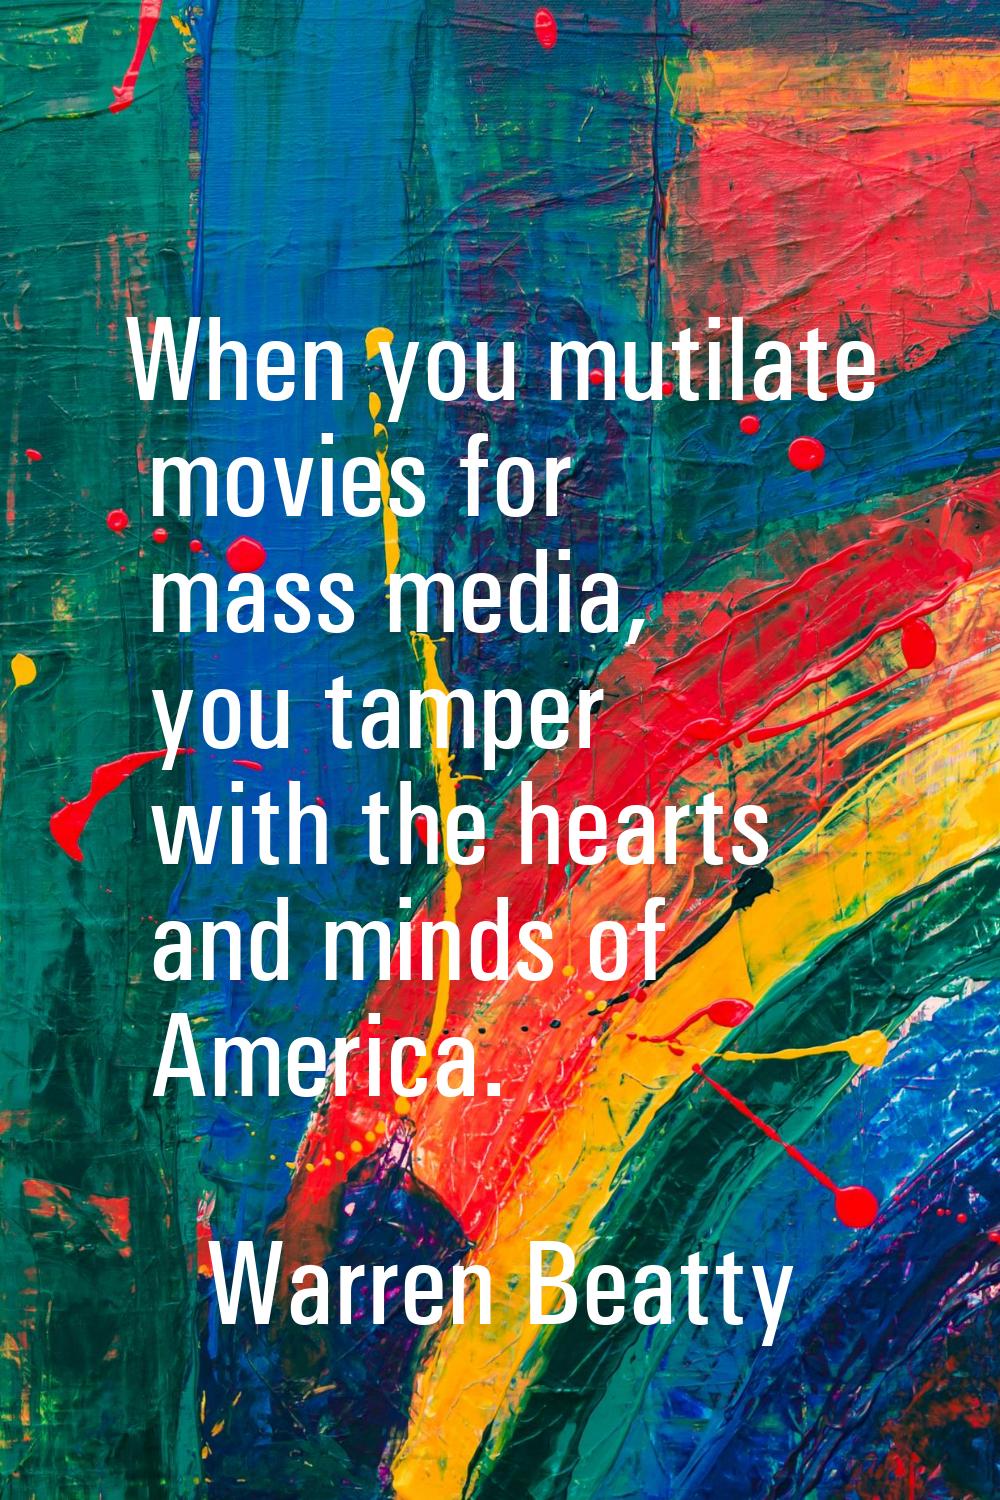 When you mutilate movies for mass media, you tamper with the hearts and minds of America.